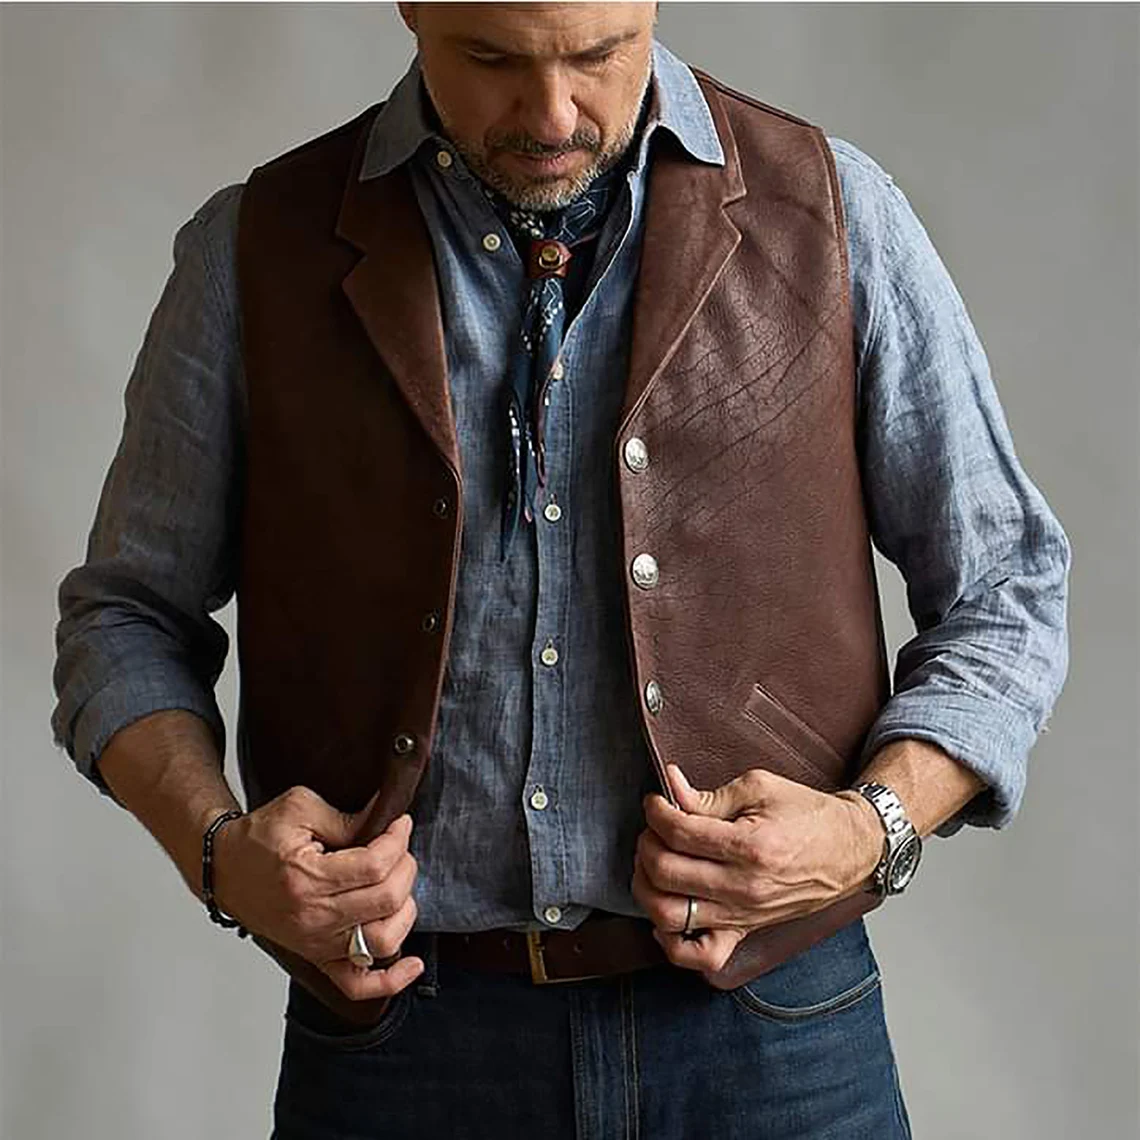 Crafting a Custom Leather Vest: A Step-by-Step Guide